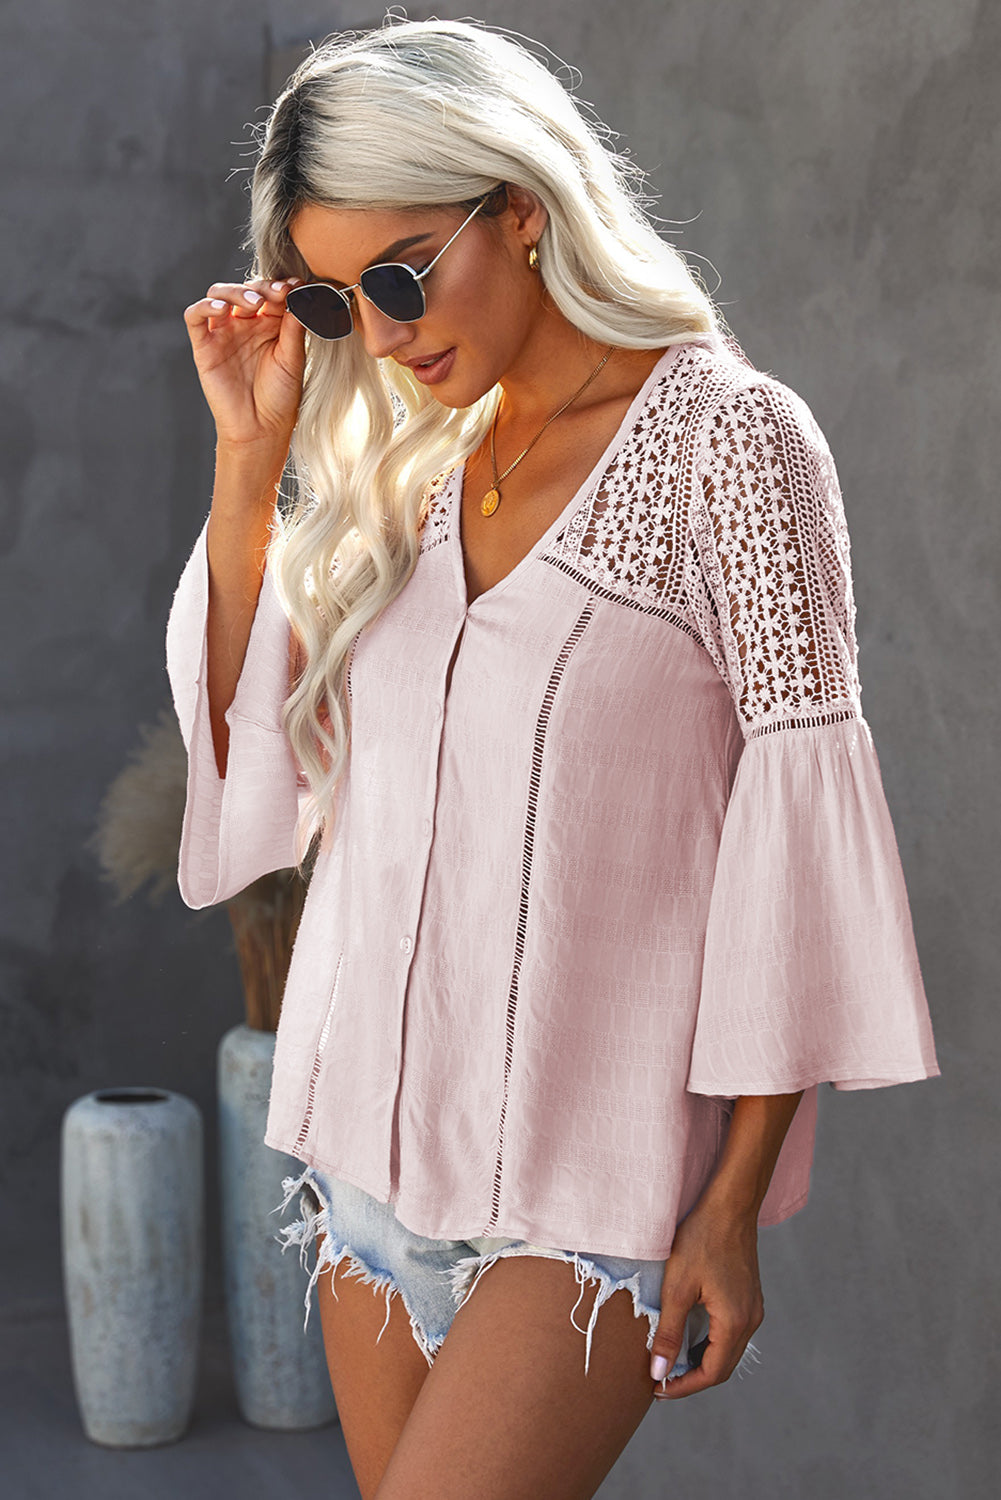 Women's Flare Sleeve Spliced Lace V-Neck Top